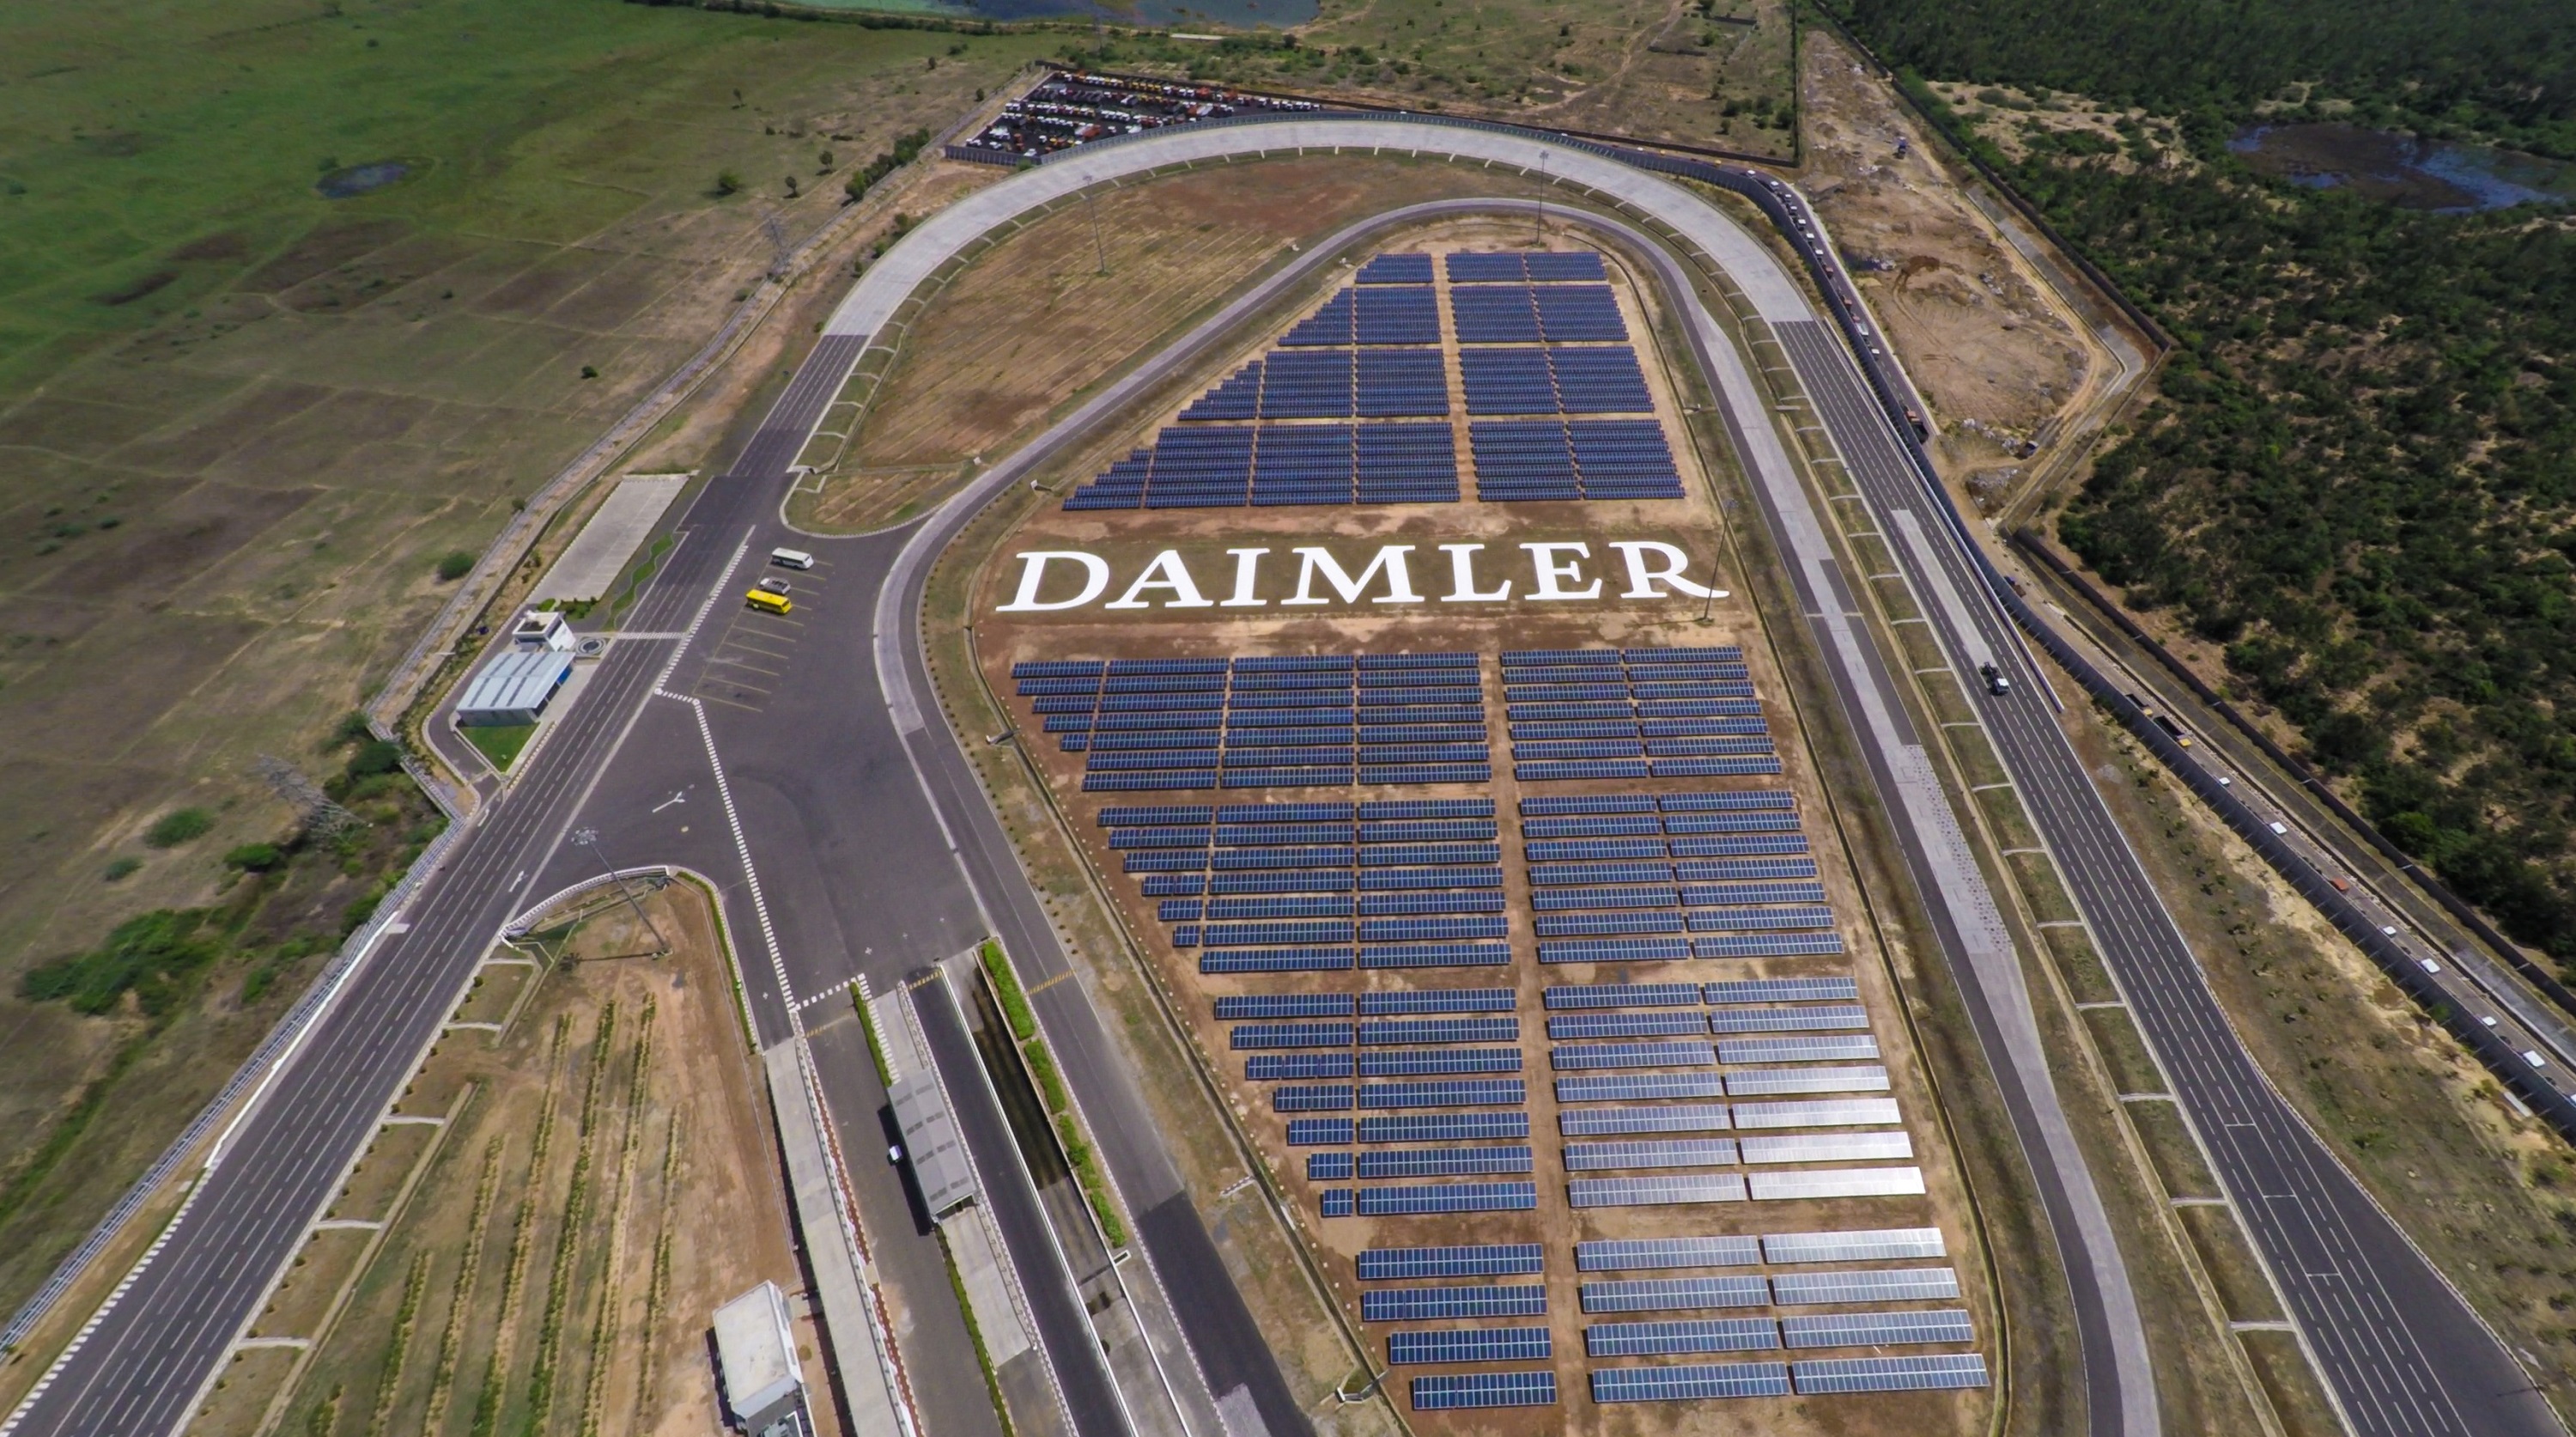 daimler-truck-completes-a-successful-decade-in-india-aims-at-100-carbon-free-operations-in-oragadam-india-by-2025